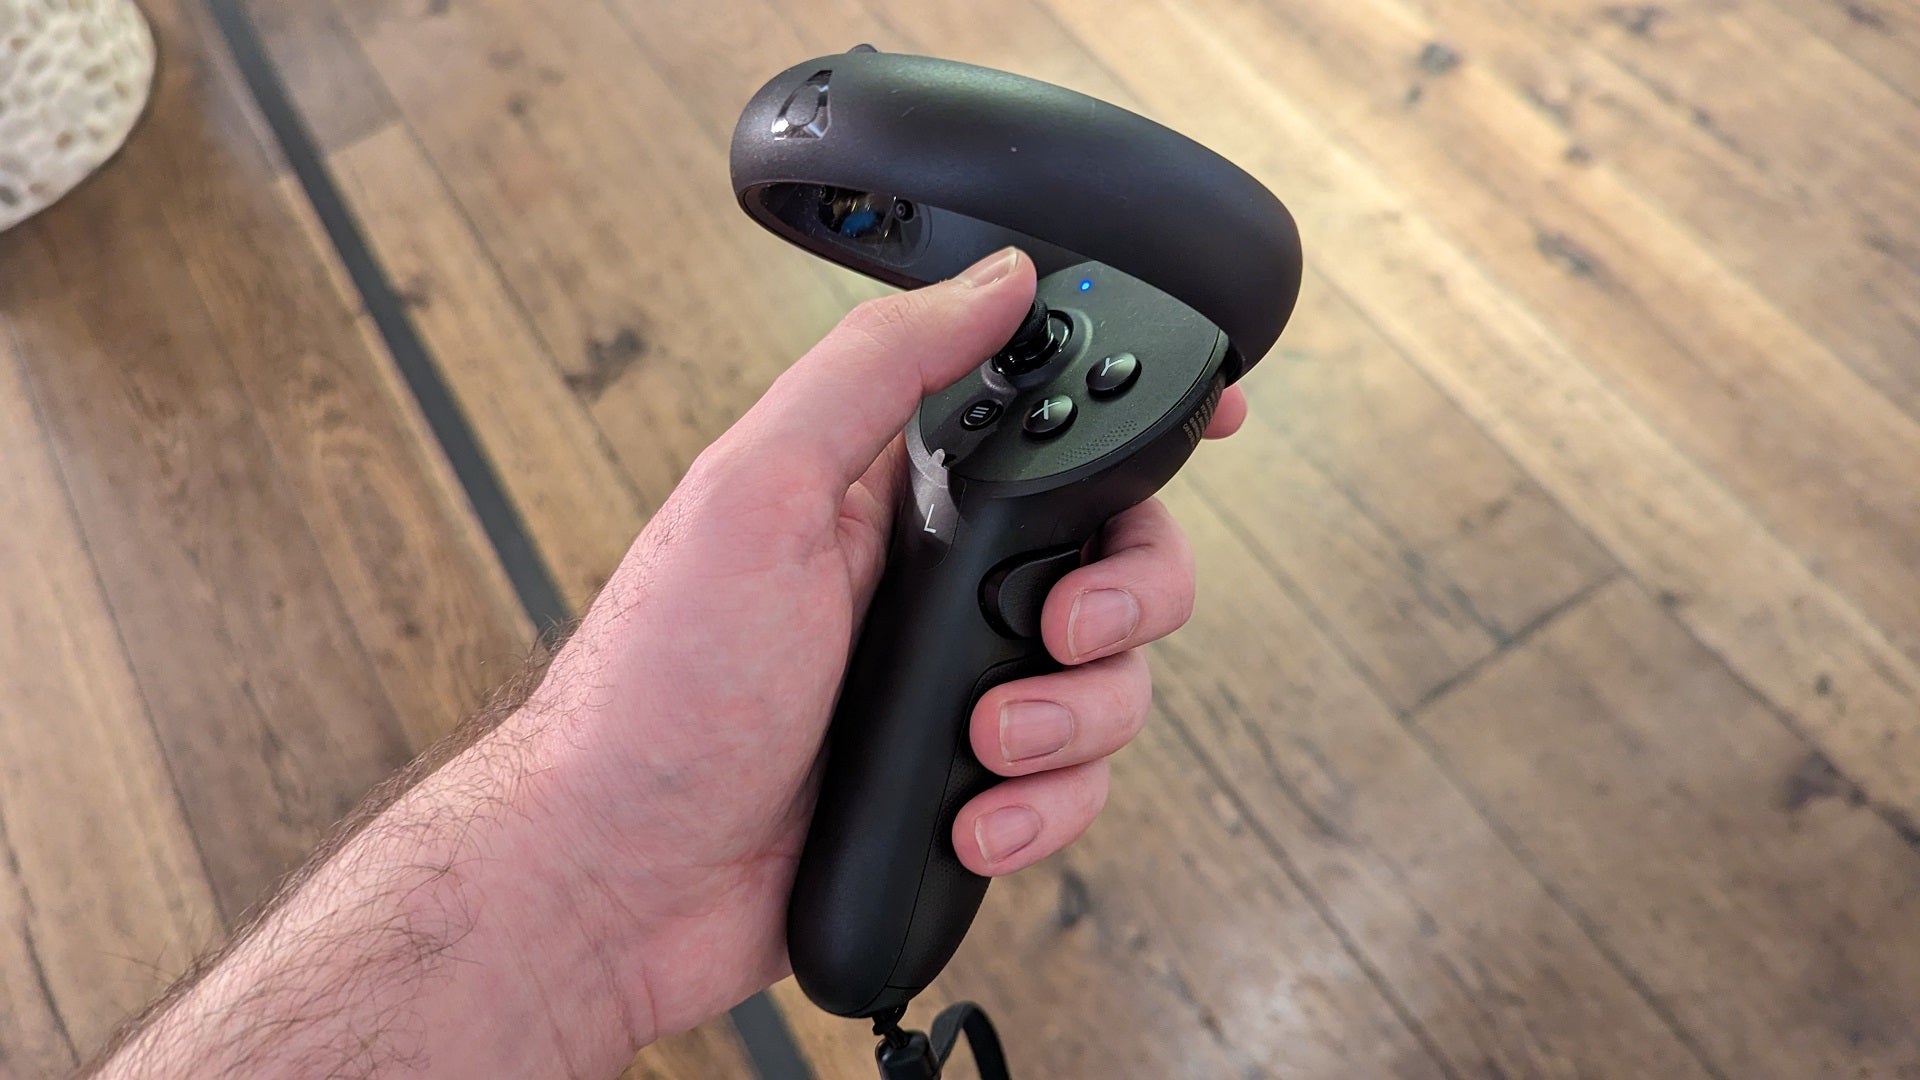 A Vive XR Elite controller being held in a hand.